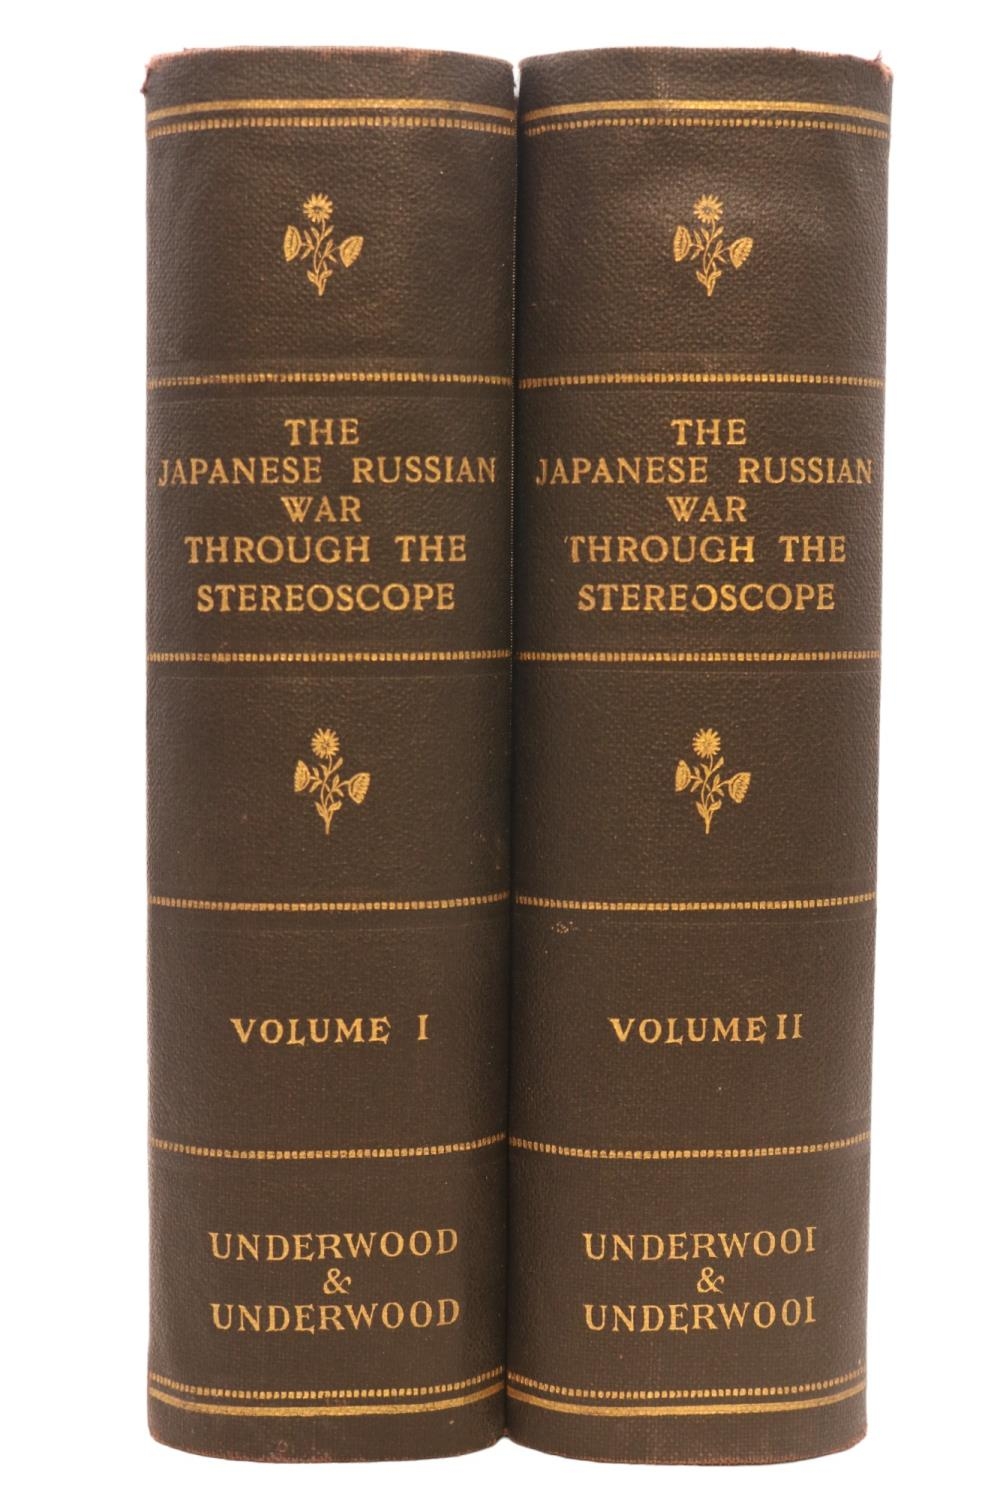 A Cased set of Underwood & Underwood 'The Japanese Russian War Through the Stereoscope'. Circa 1905,